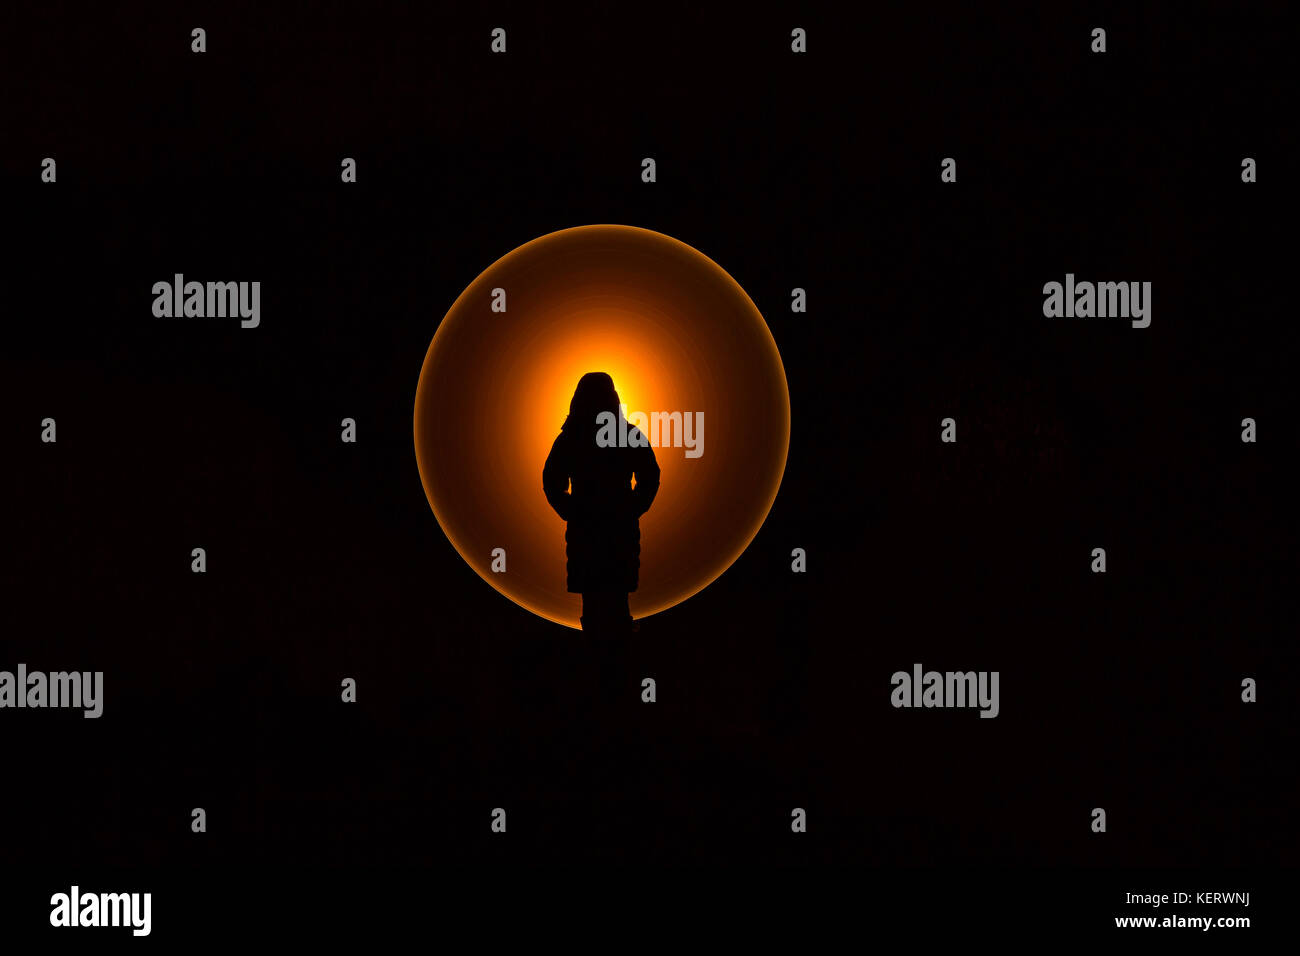 Silhouette of figure, hands in pocket, against unexplained, mysterious circle of glowing, orange light. Blacked out night scene with special lighting. Stock Photo